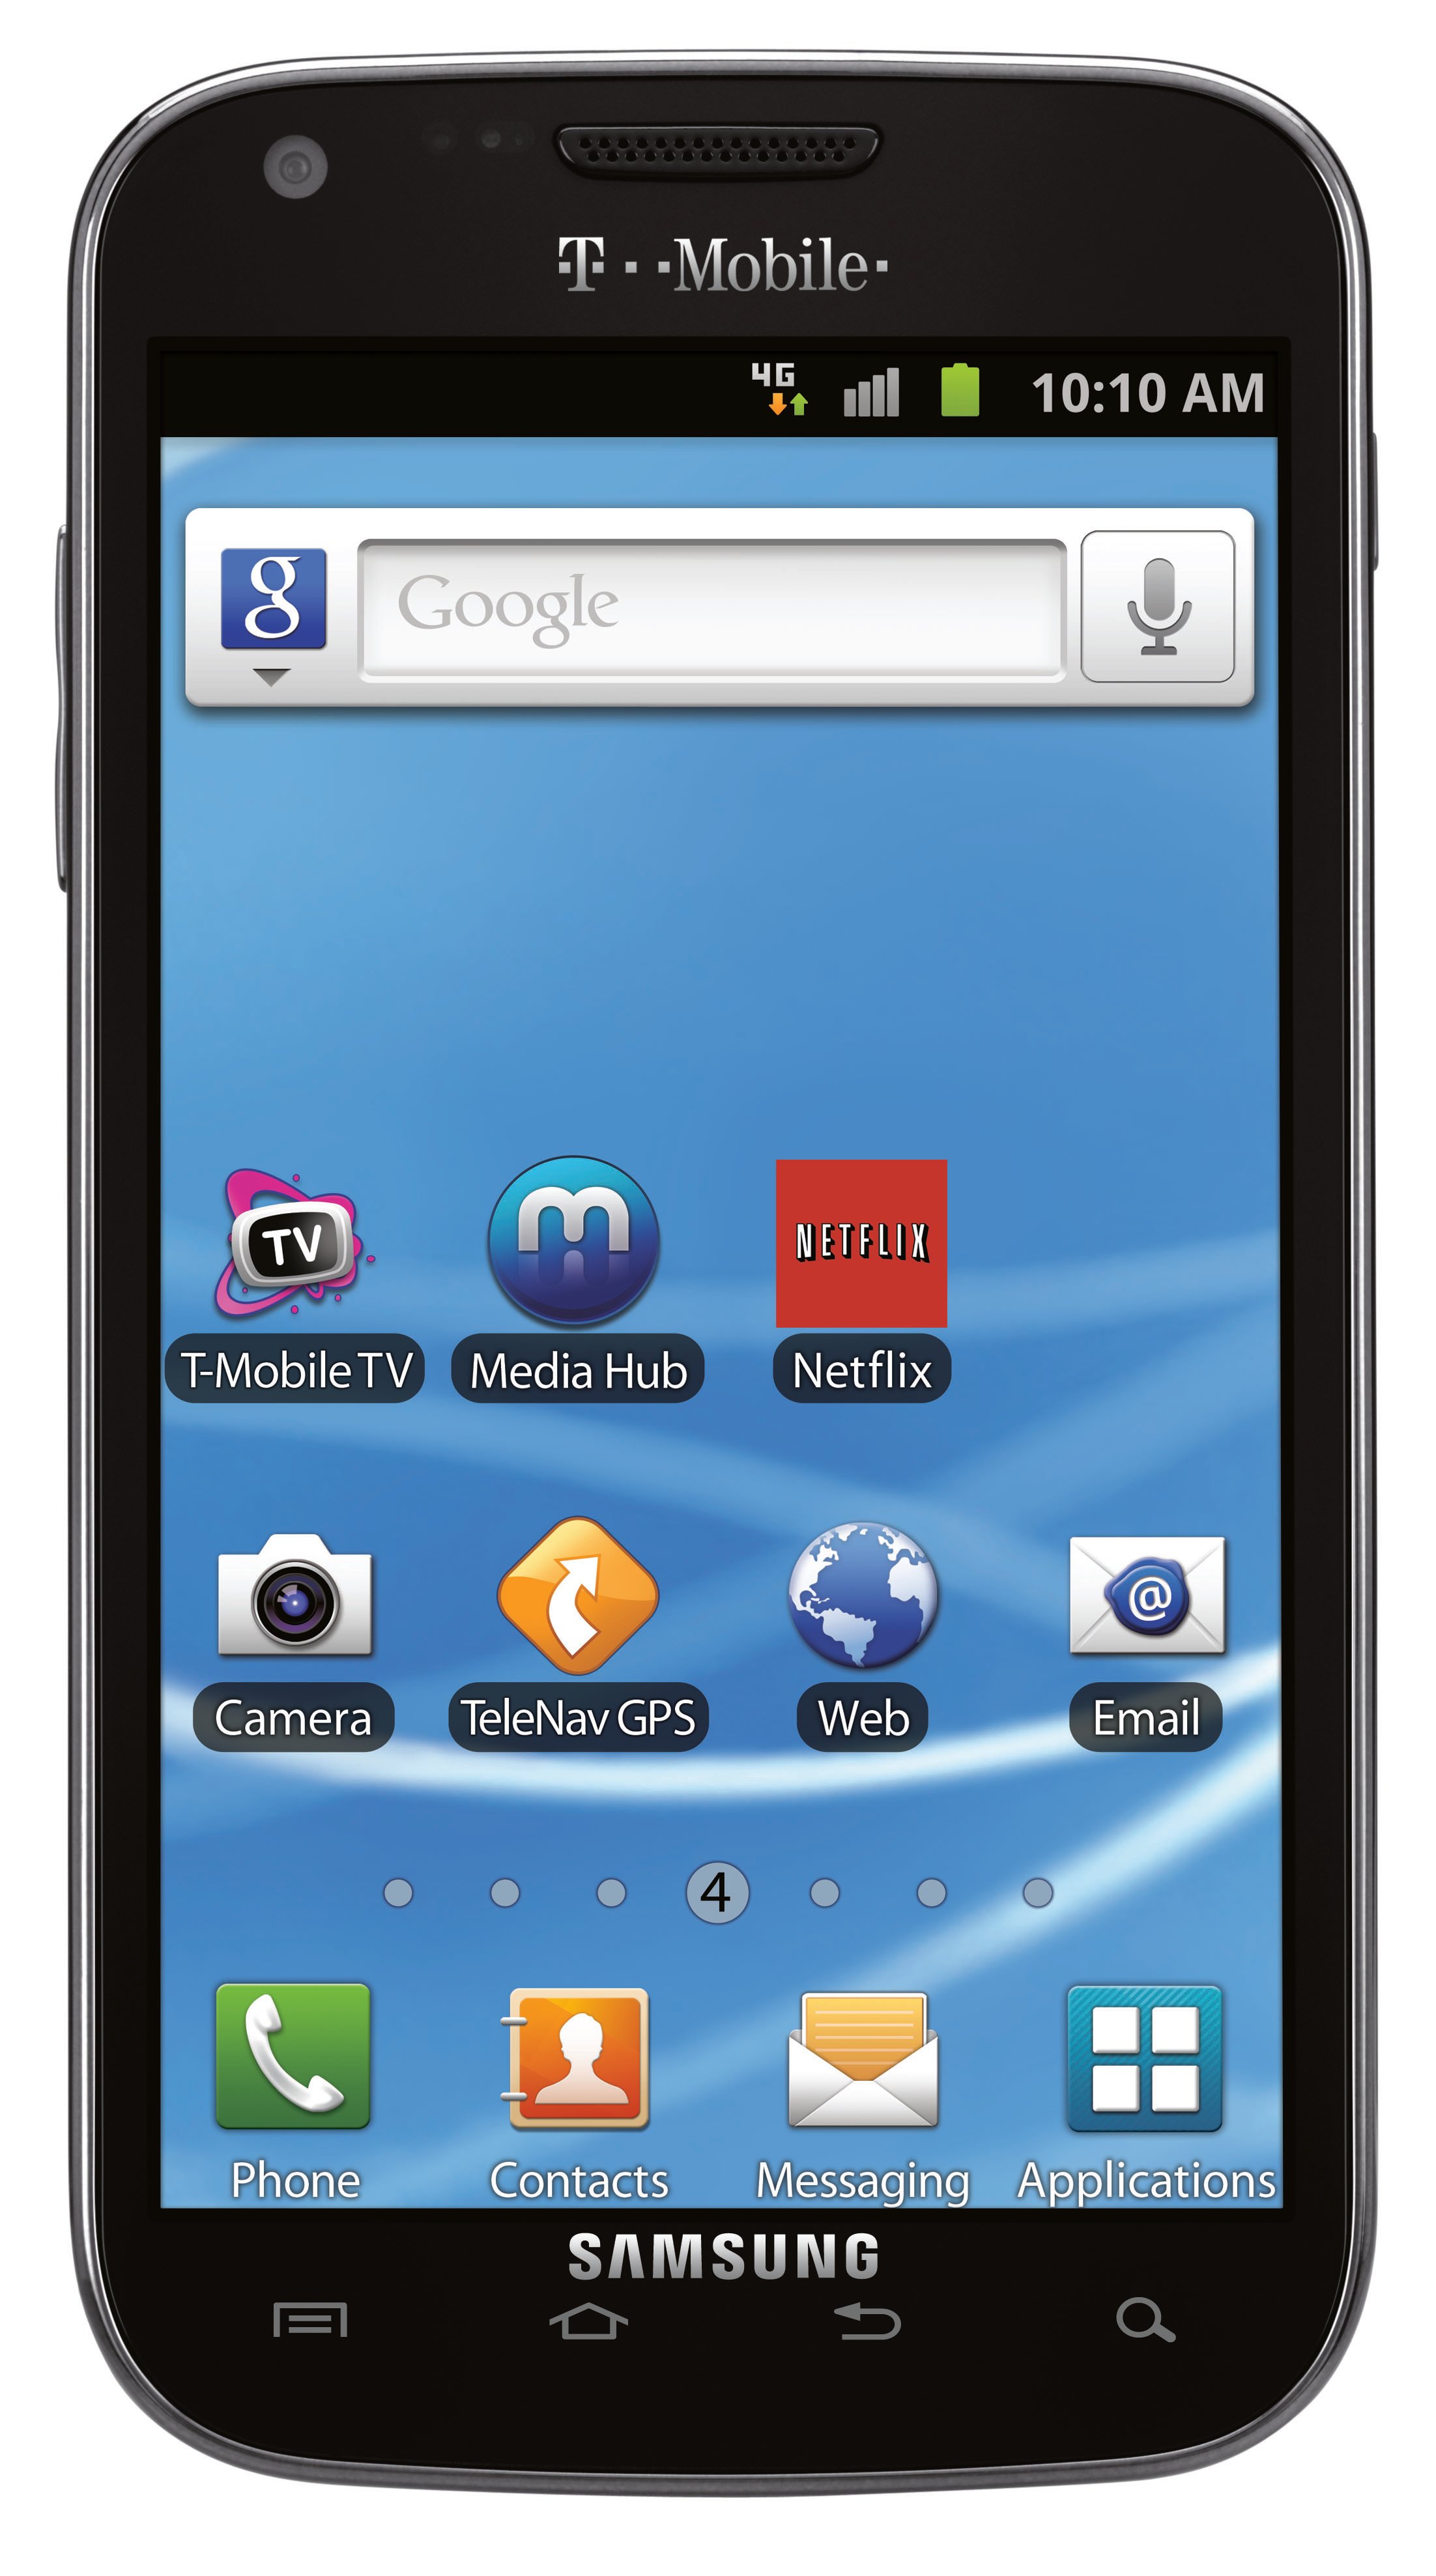 Samsung Galaxy S II T Mobile with HSPA+42